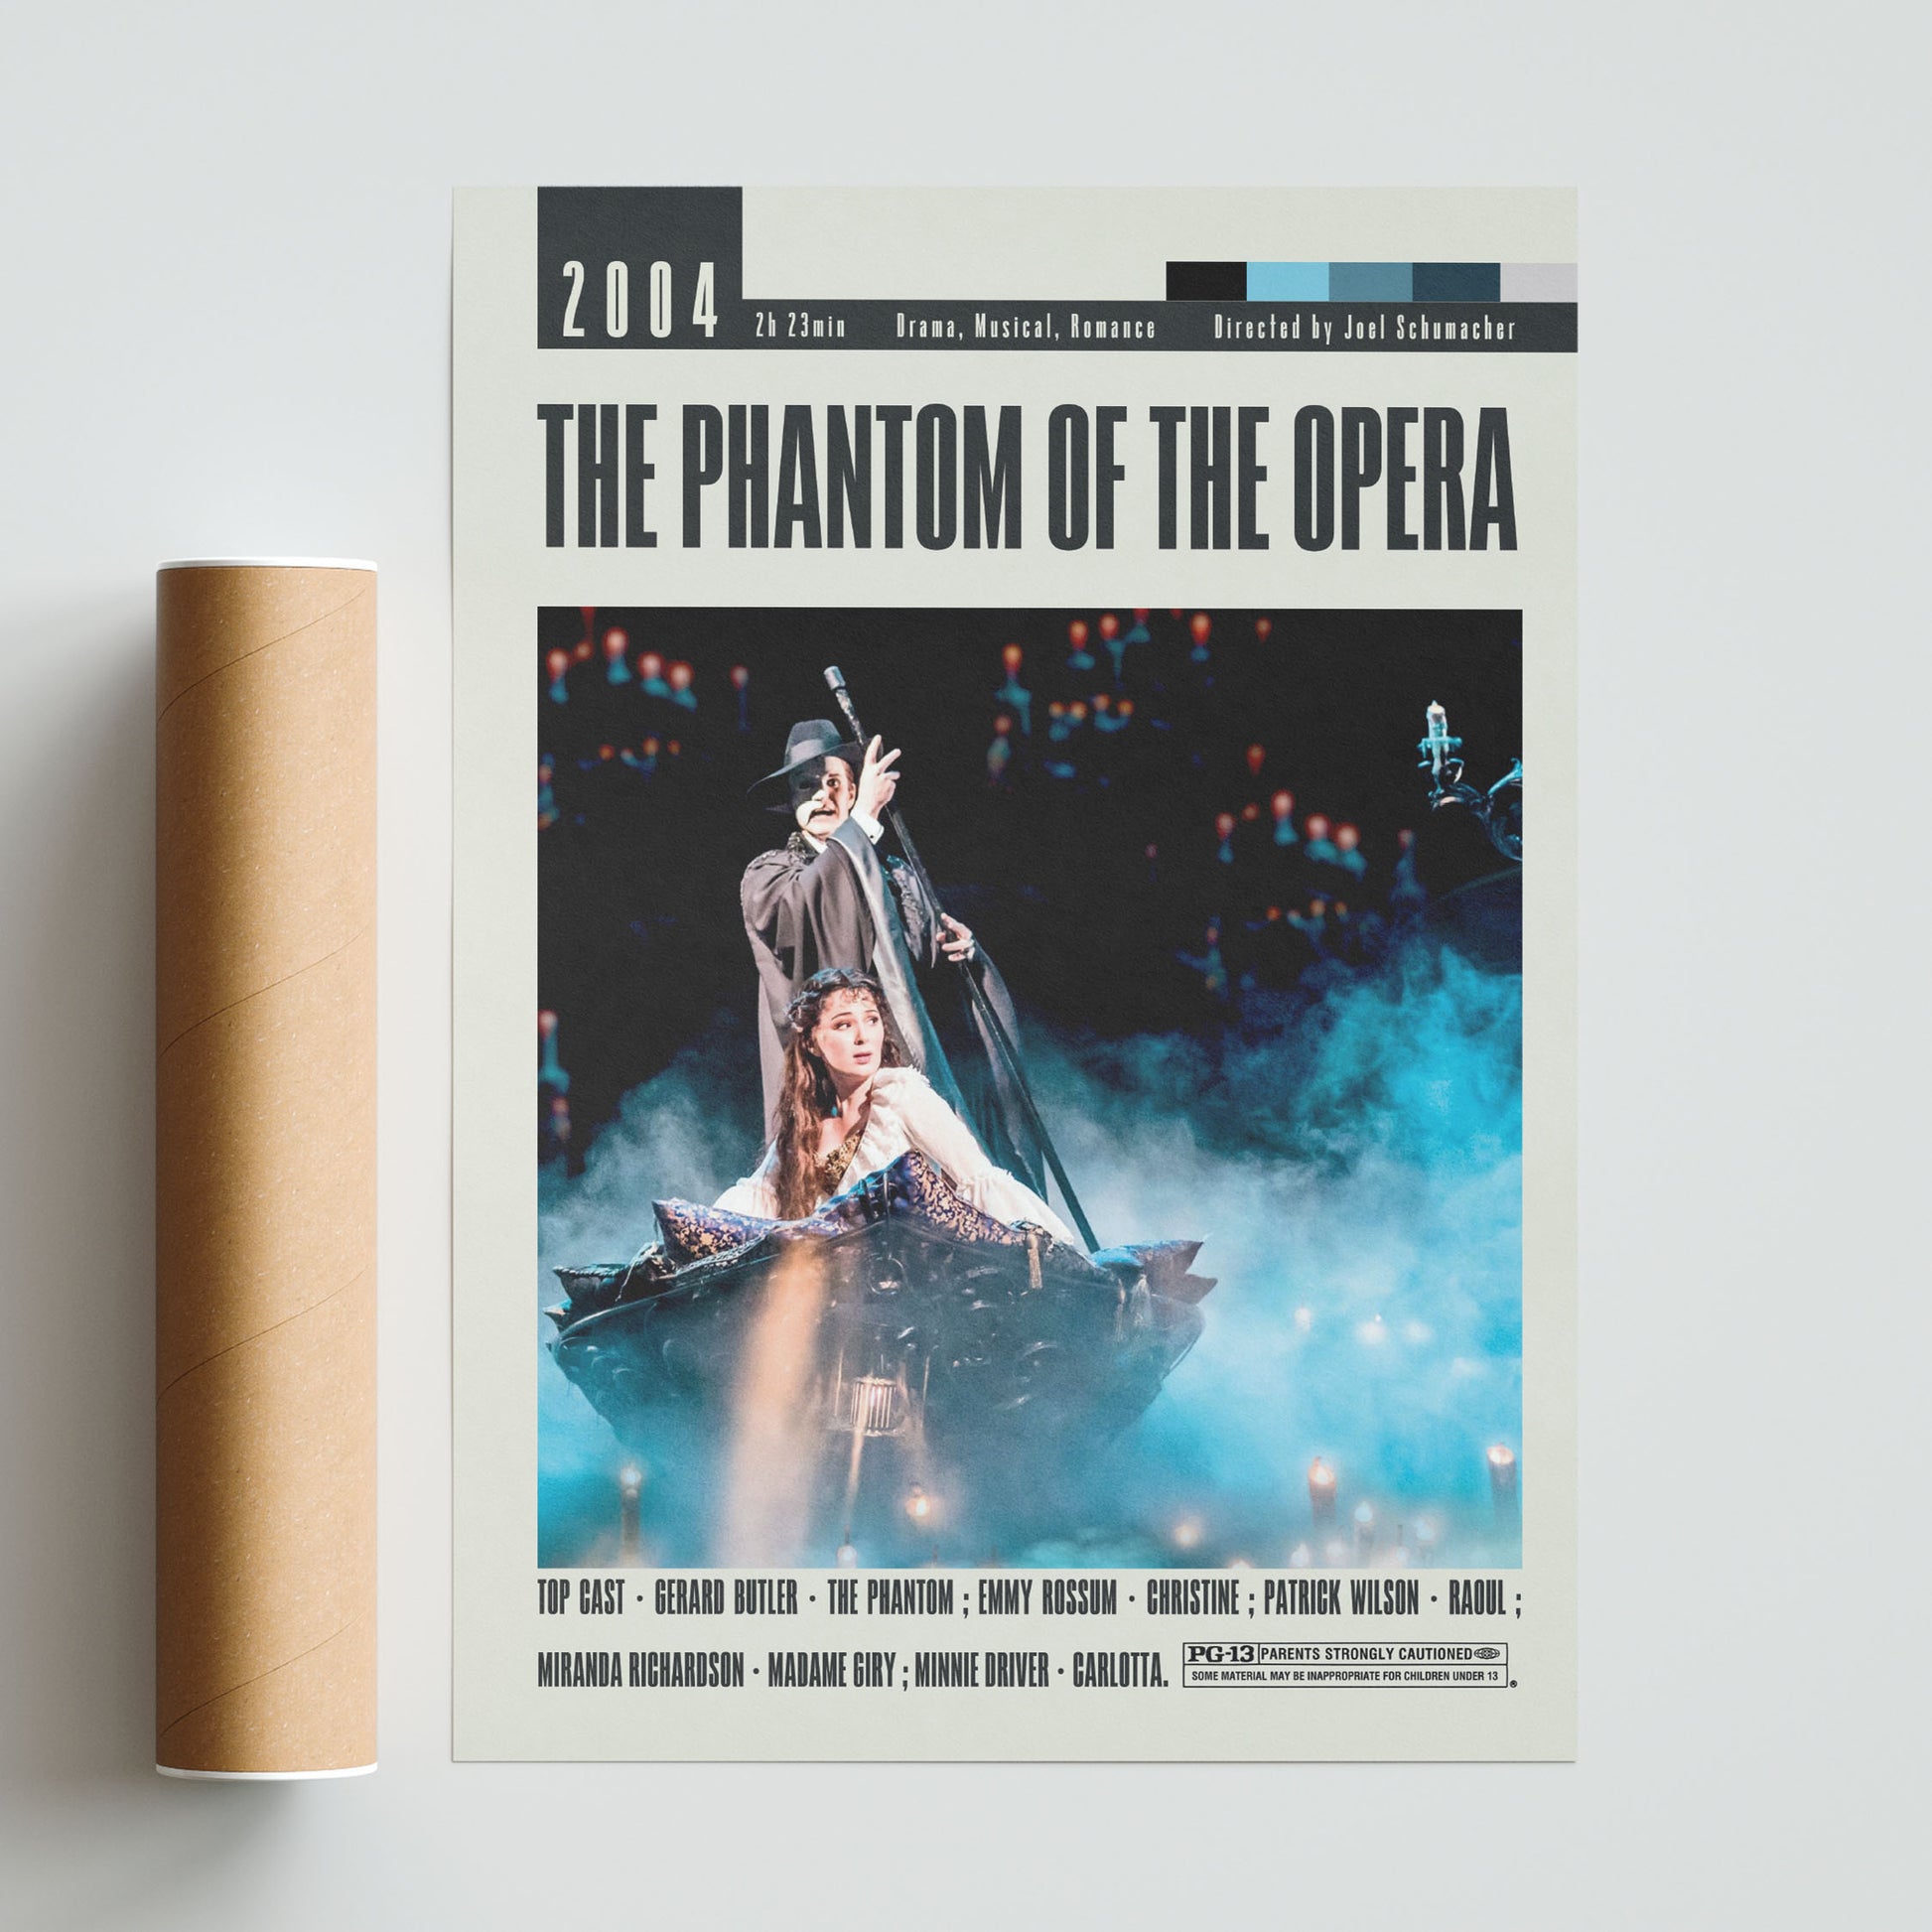 Transform your home into a movie lover's paradise with these original Phantom of the Opera posters. Featuring iconic designs from Joel Schumacher's beloved film, these large movie art posters add a touch of vintage charm to any room. Unframed and affordable, these custom prints make perfect wall art decor.